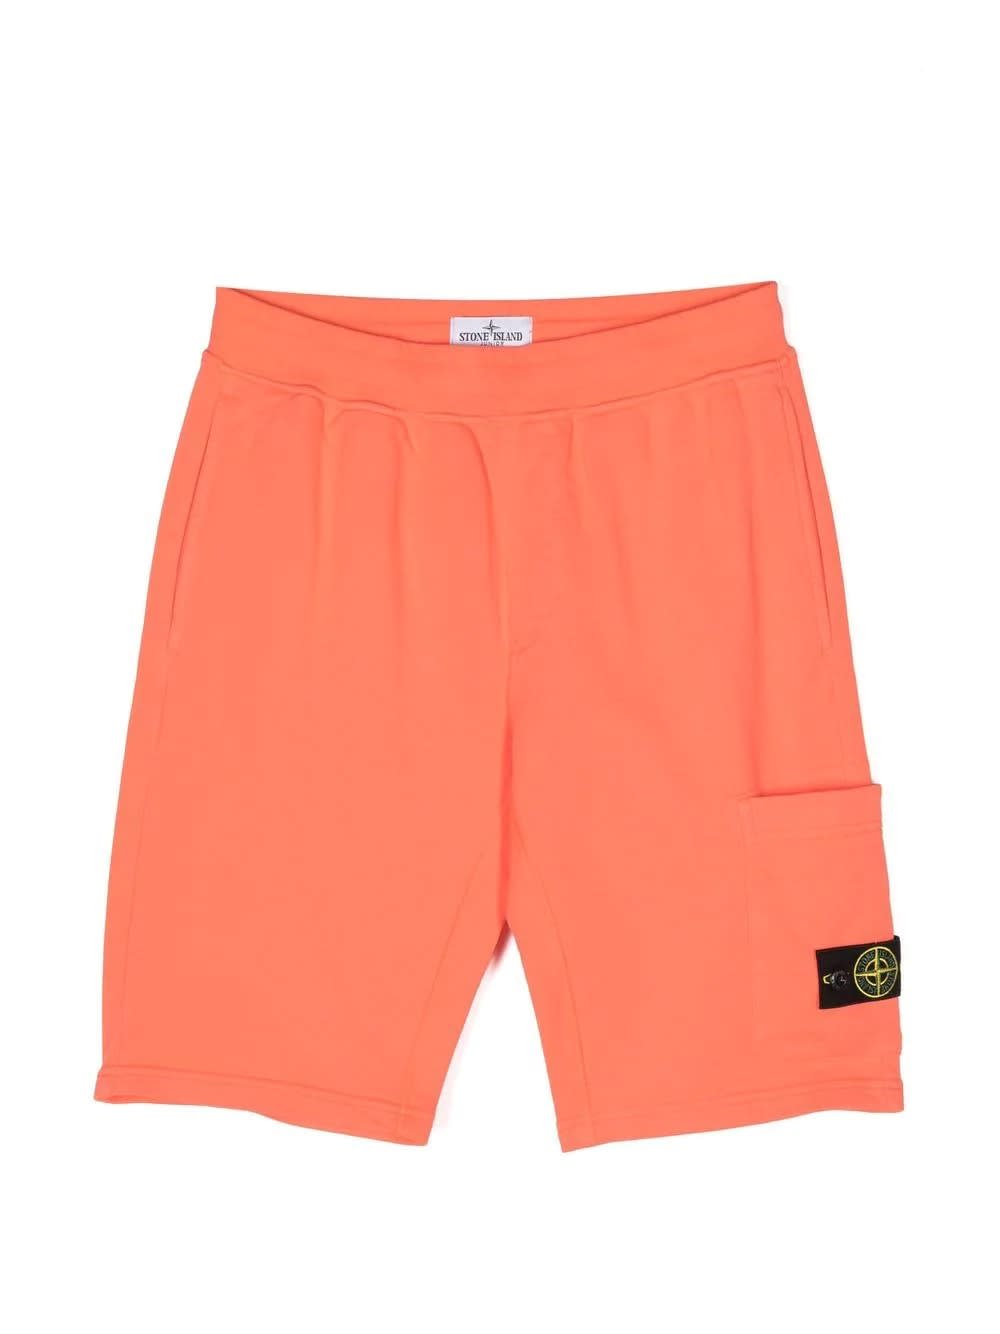 STONE ISLAND JUNIOR CORAL SPORTS SHORTS WITH LOGO